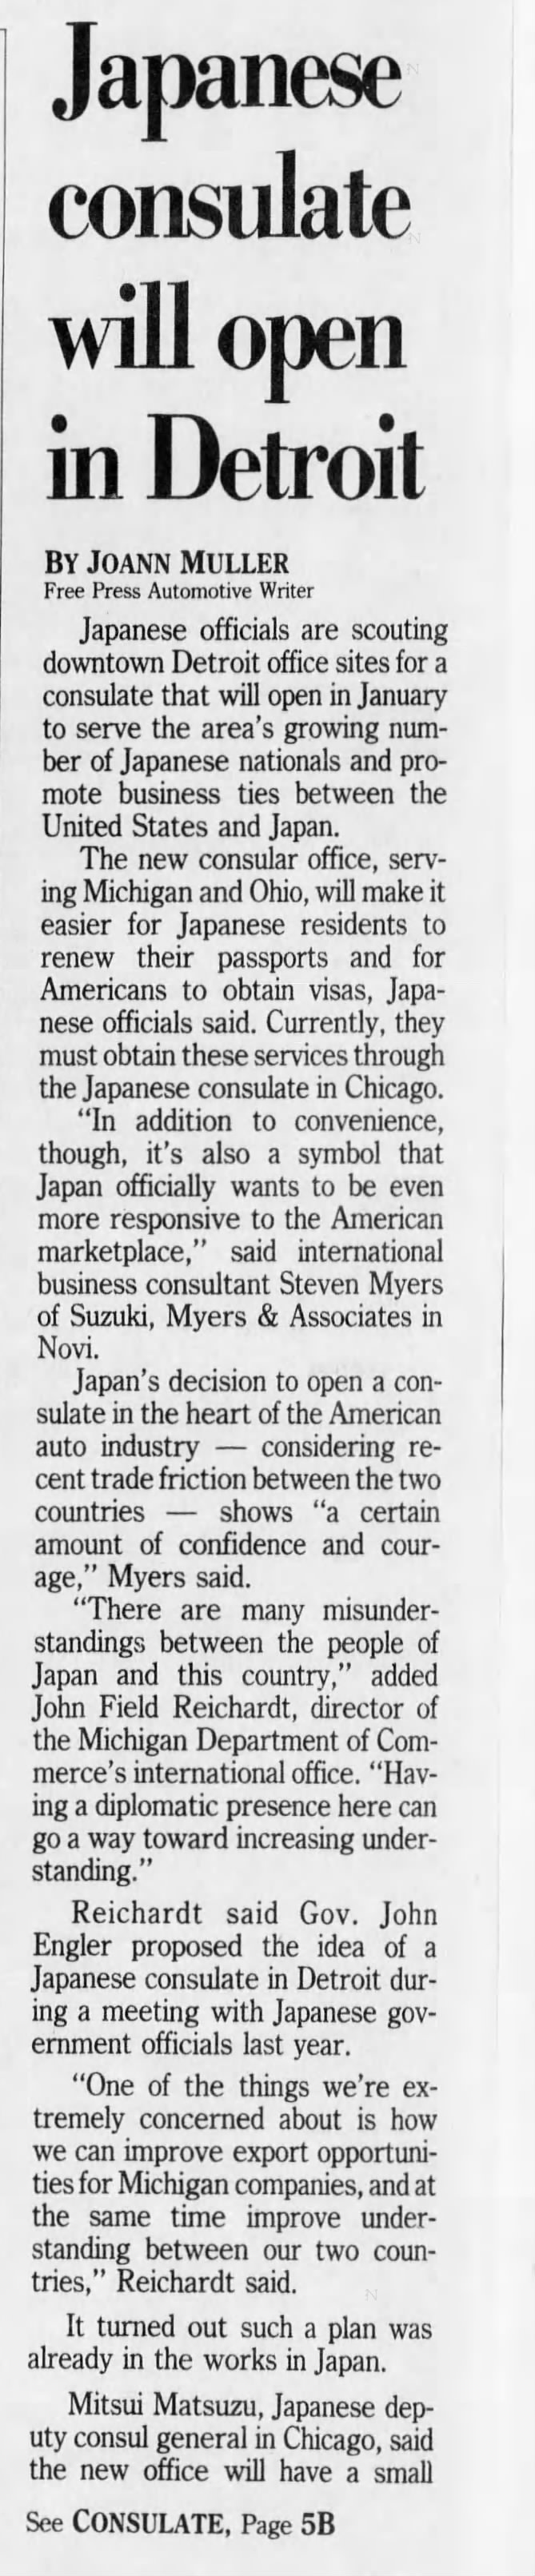 For Japanese Consulate in Detroit